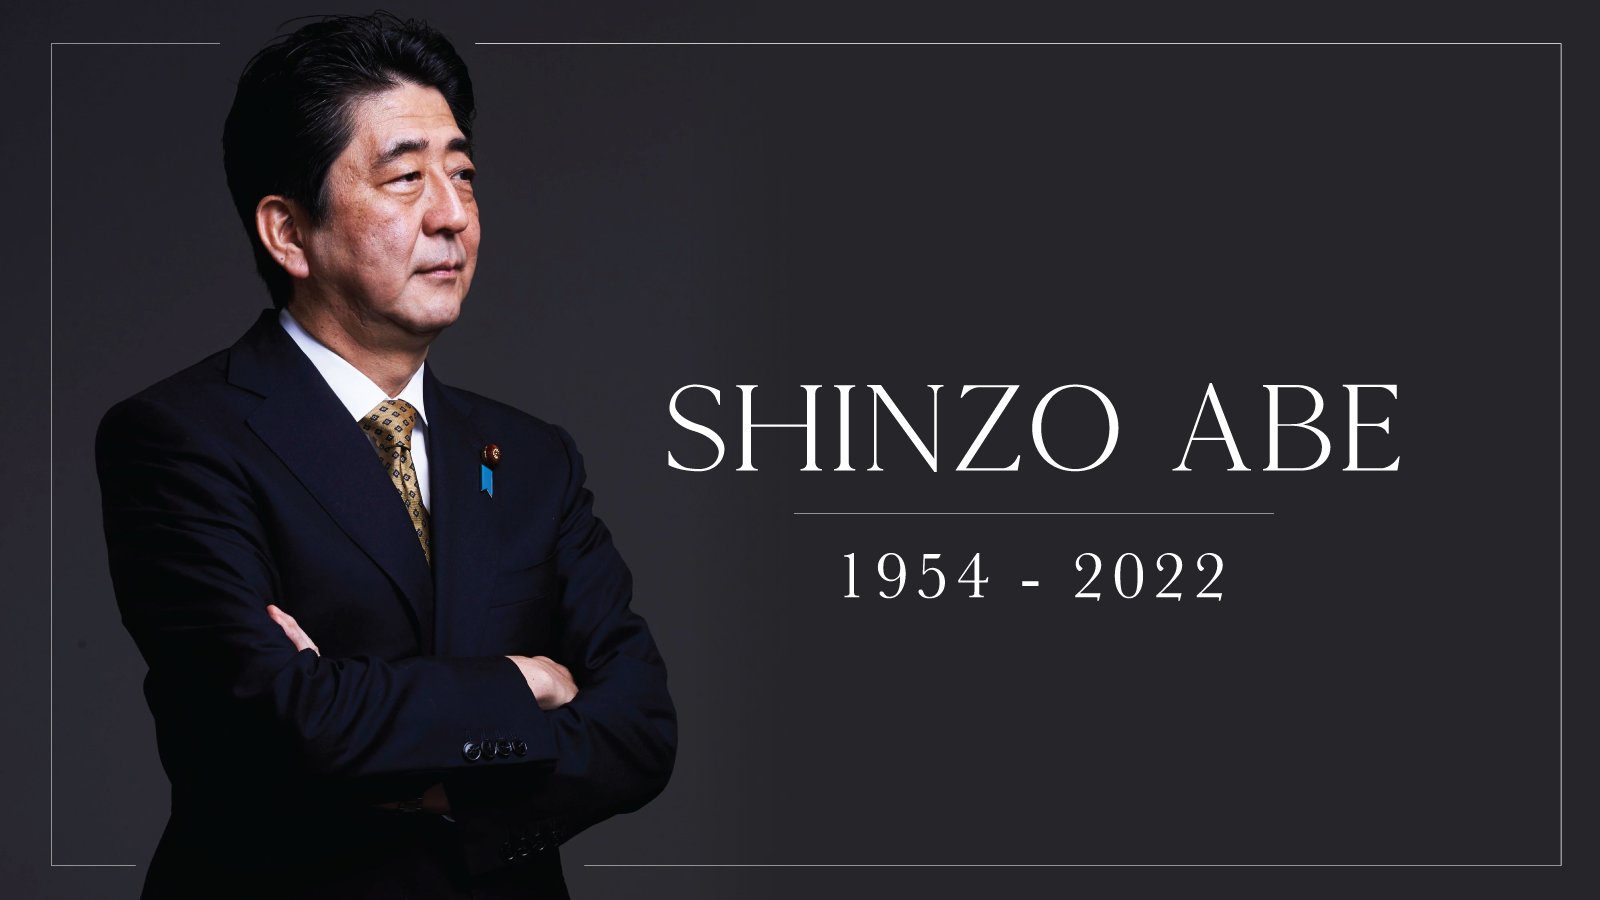 Mike Pence Shinzo Abe's Passing, Japan Lost A Giant And America Lost One Of Our Greatest Friends. Abe San Was Not Only Japan's Longest Serving Prime Minister, He Was An